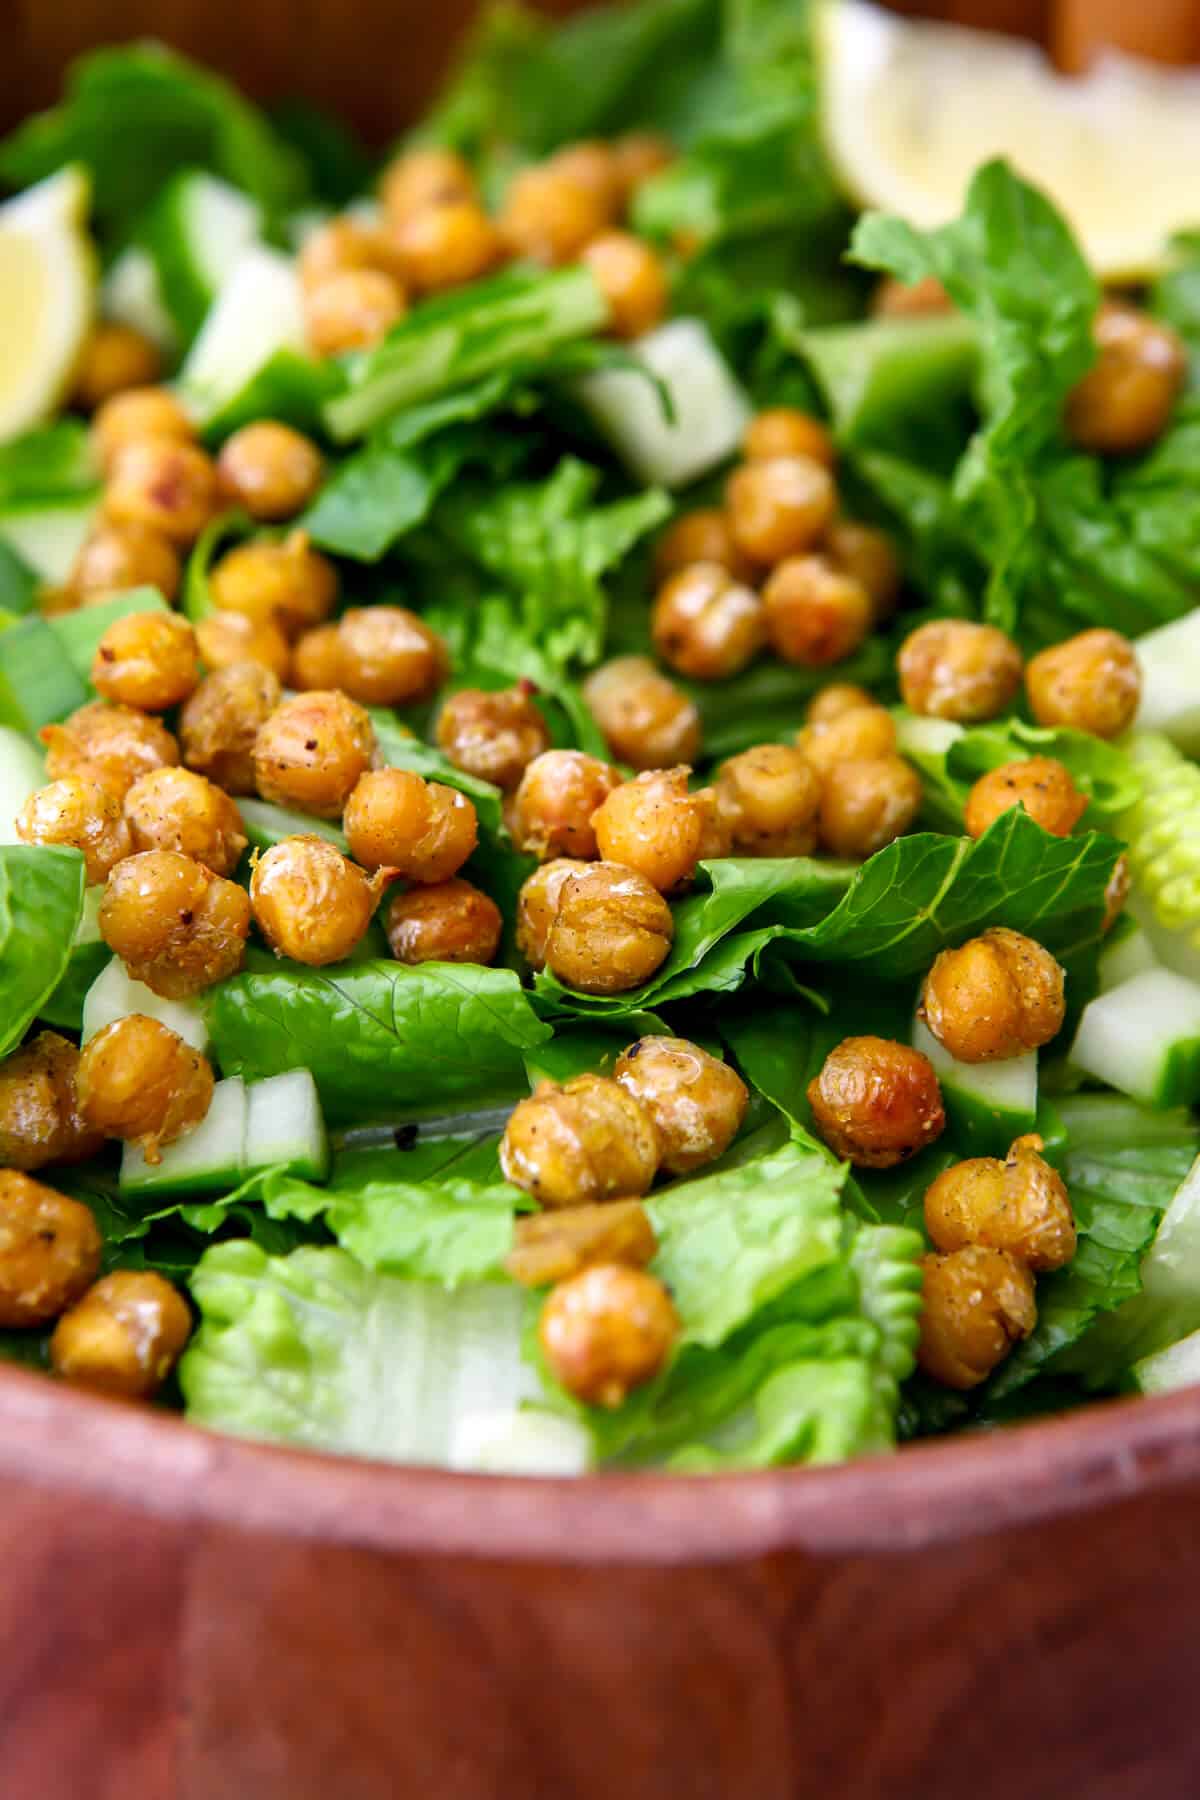 A salad topped with sauteed chickpeas.